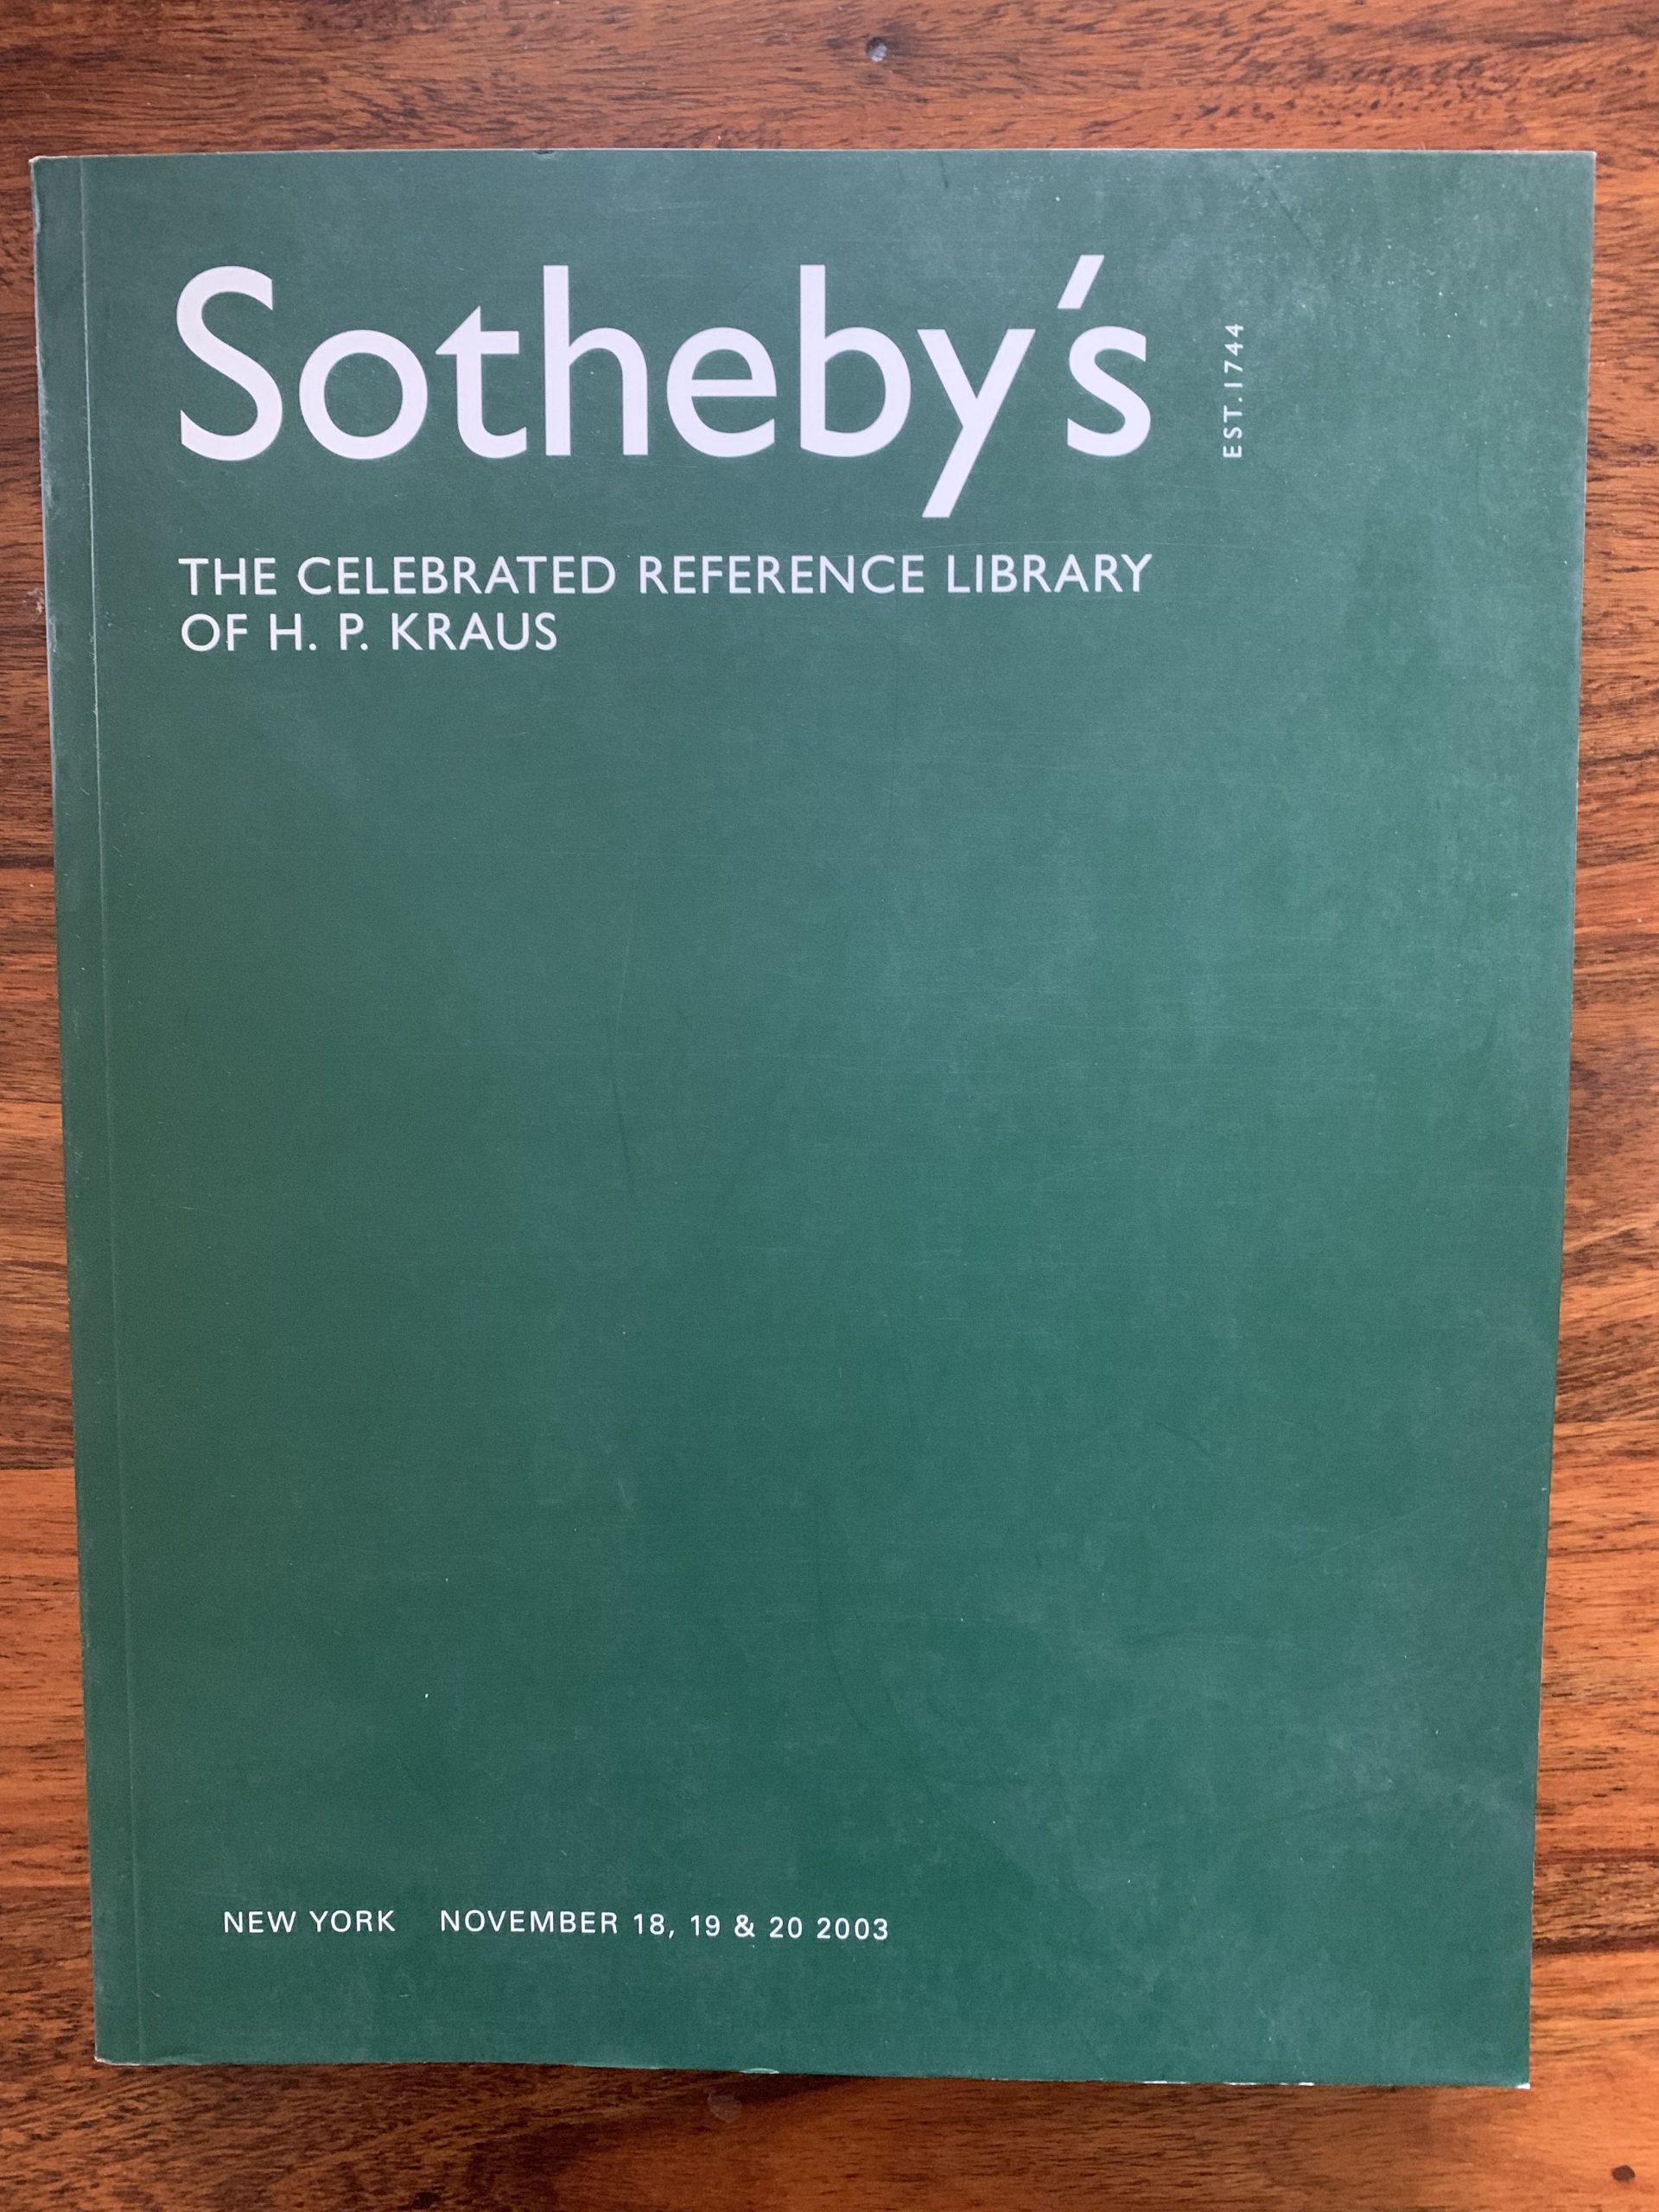 Sotheby’s. The Celebrated Reference Library of H. P. Kraus